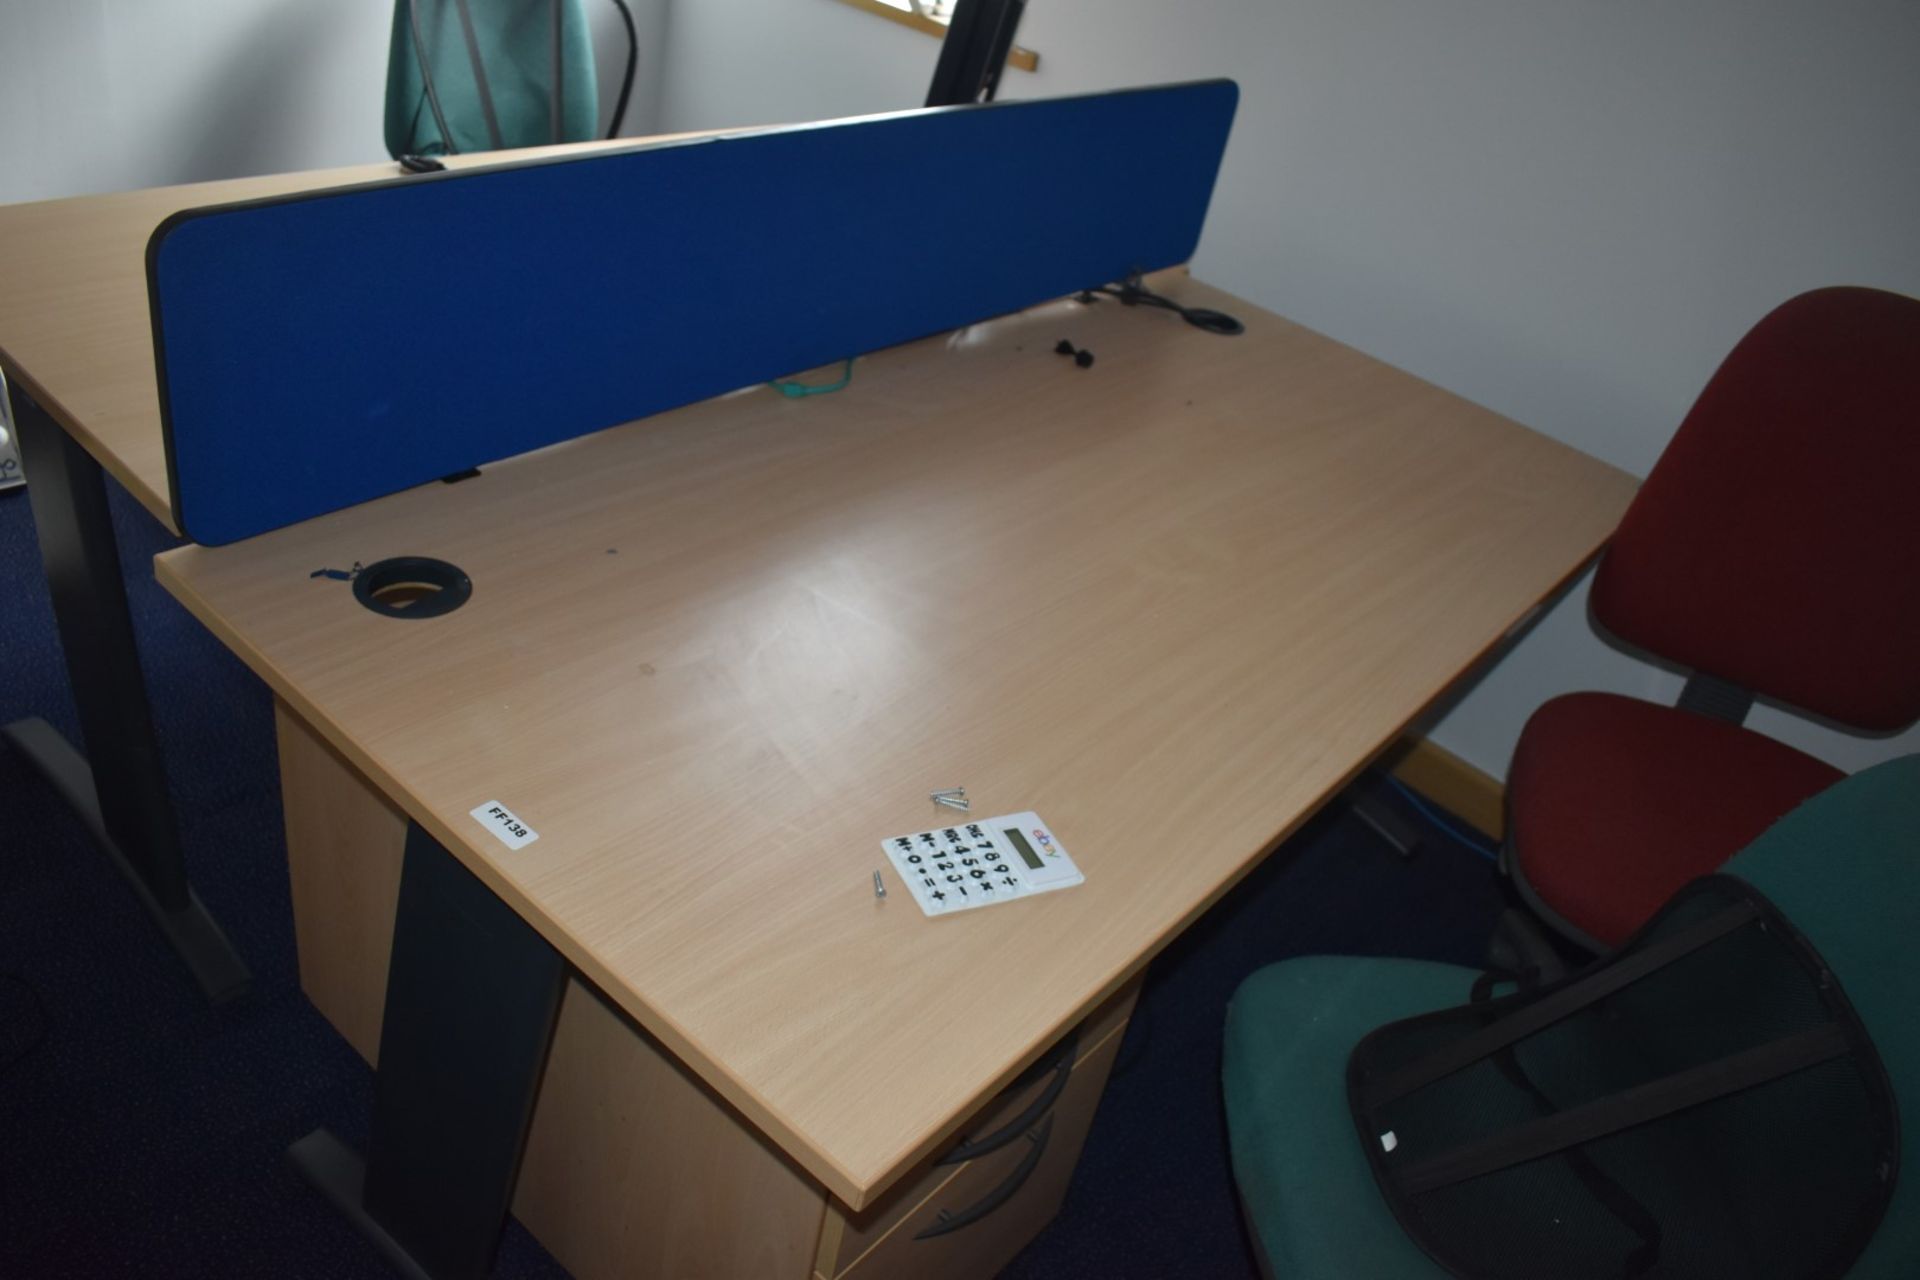 1 x Assorted Collection of Office Furniture - Includes 2 x 160cm Office Desks, 3 x Swivel Chairs, - Image 3 of 7